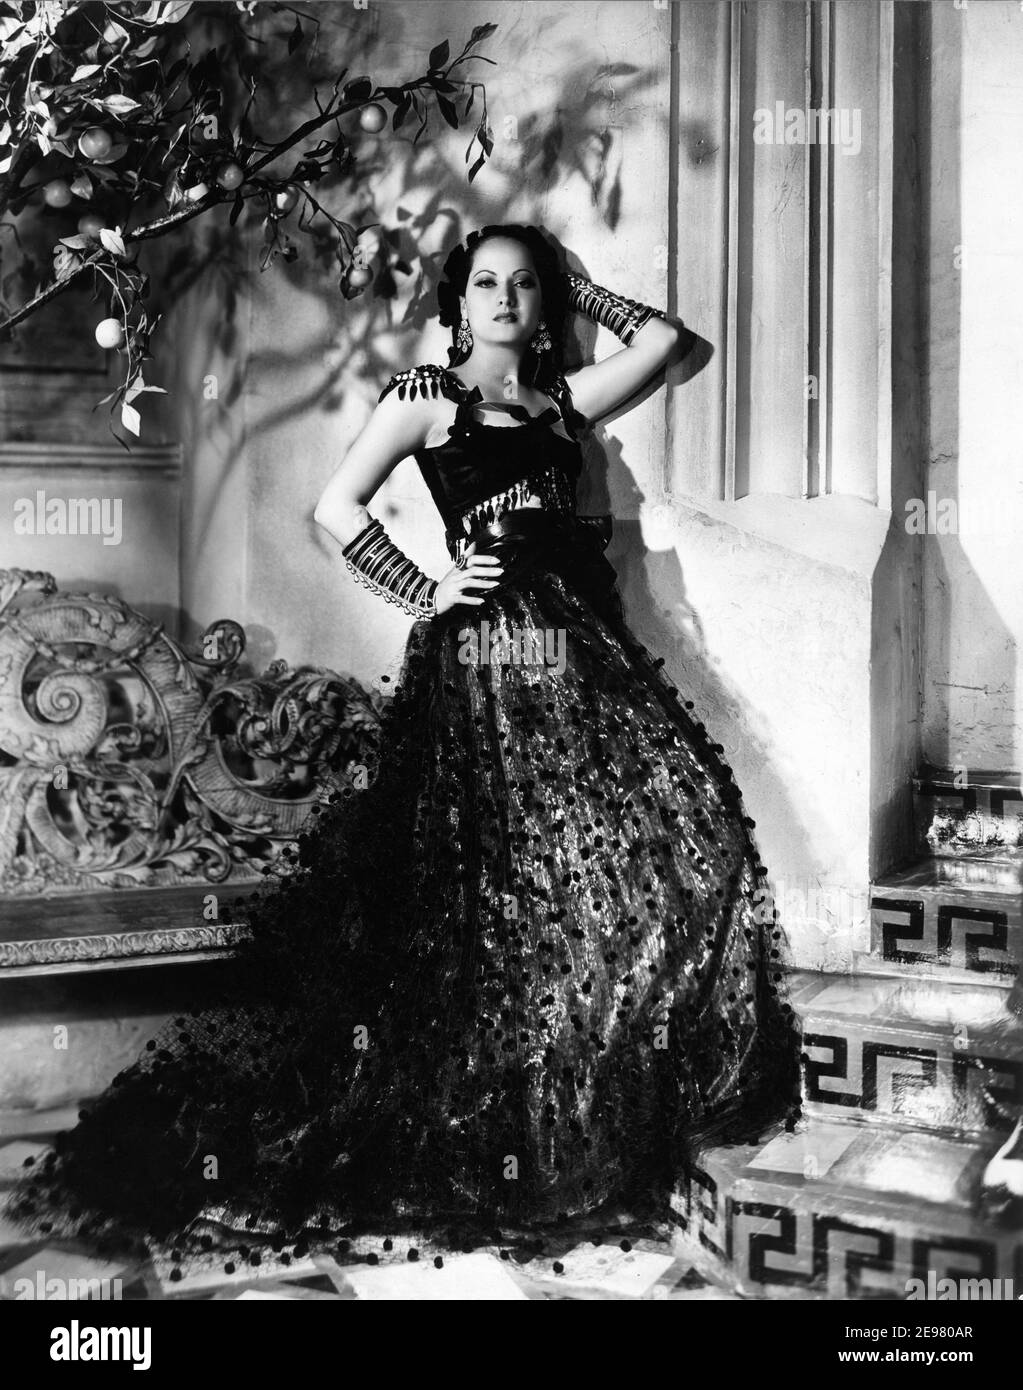 MERLE OBERON Portrait by TUNBRIDGE in THE PRIVATE LIFE OF DON JUAN 1934 director / producer ALEXANDER KORDA play Henry Bataille story/dialogue Frederick Lonsdale and Lajos Biro costumes Oliver Messel London Film Productions / United Artists Stock Photo